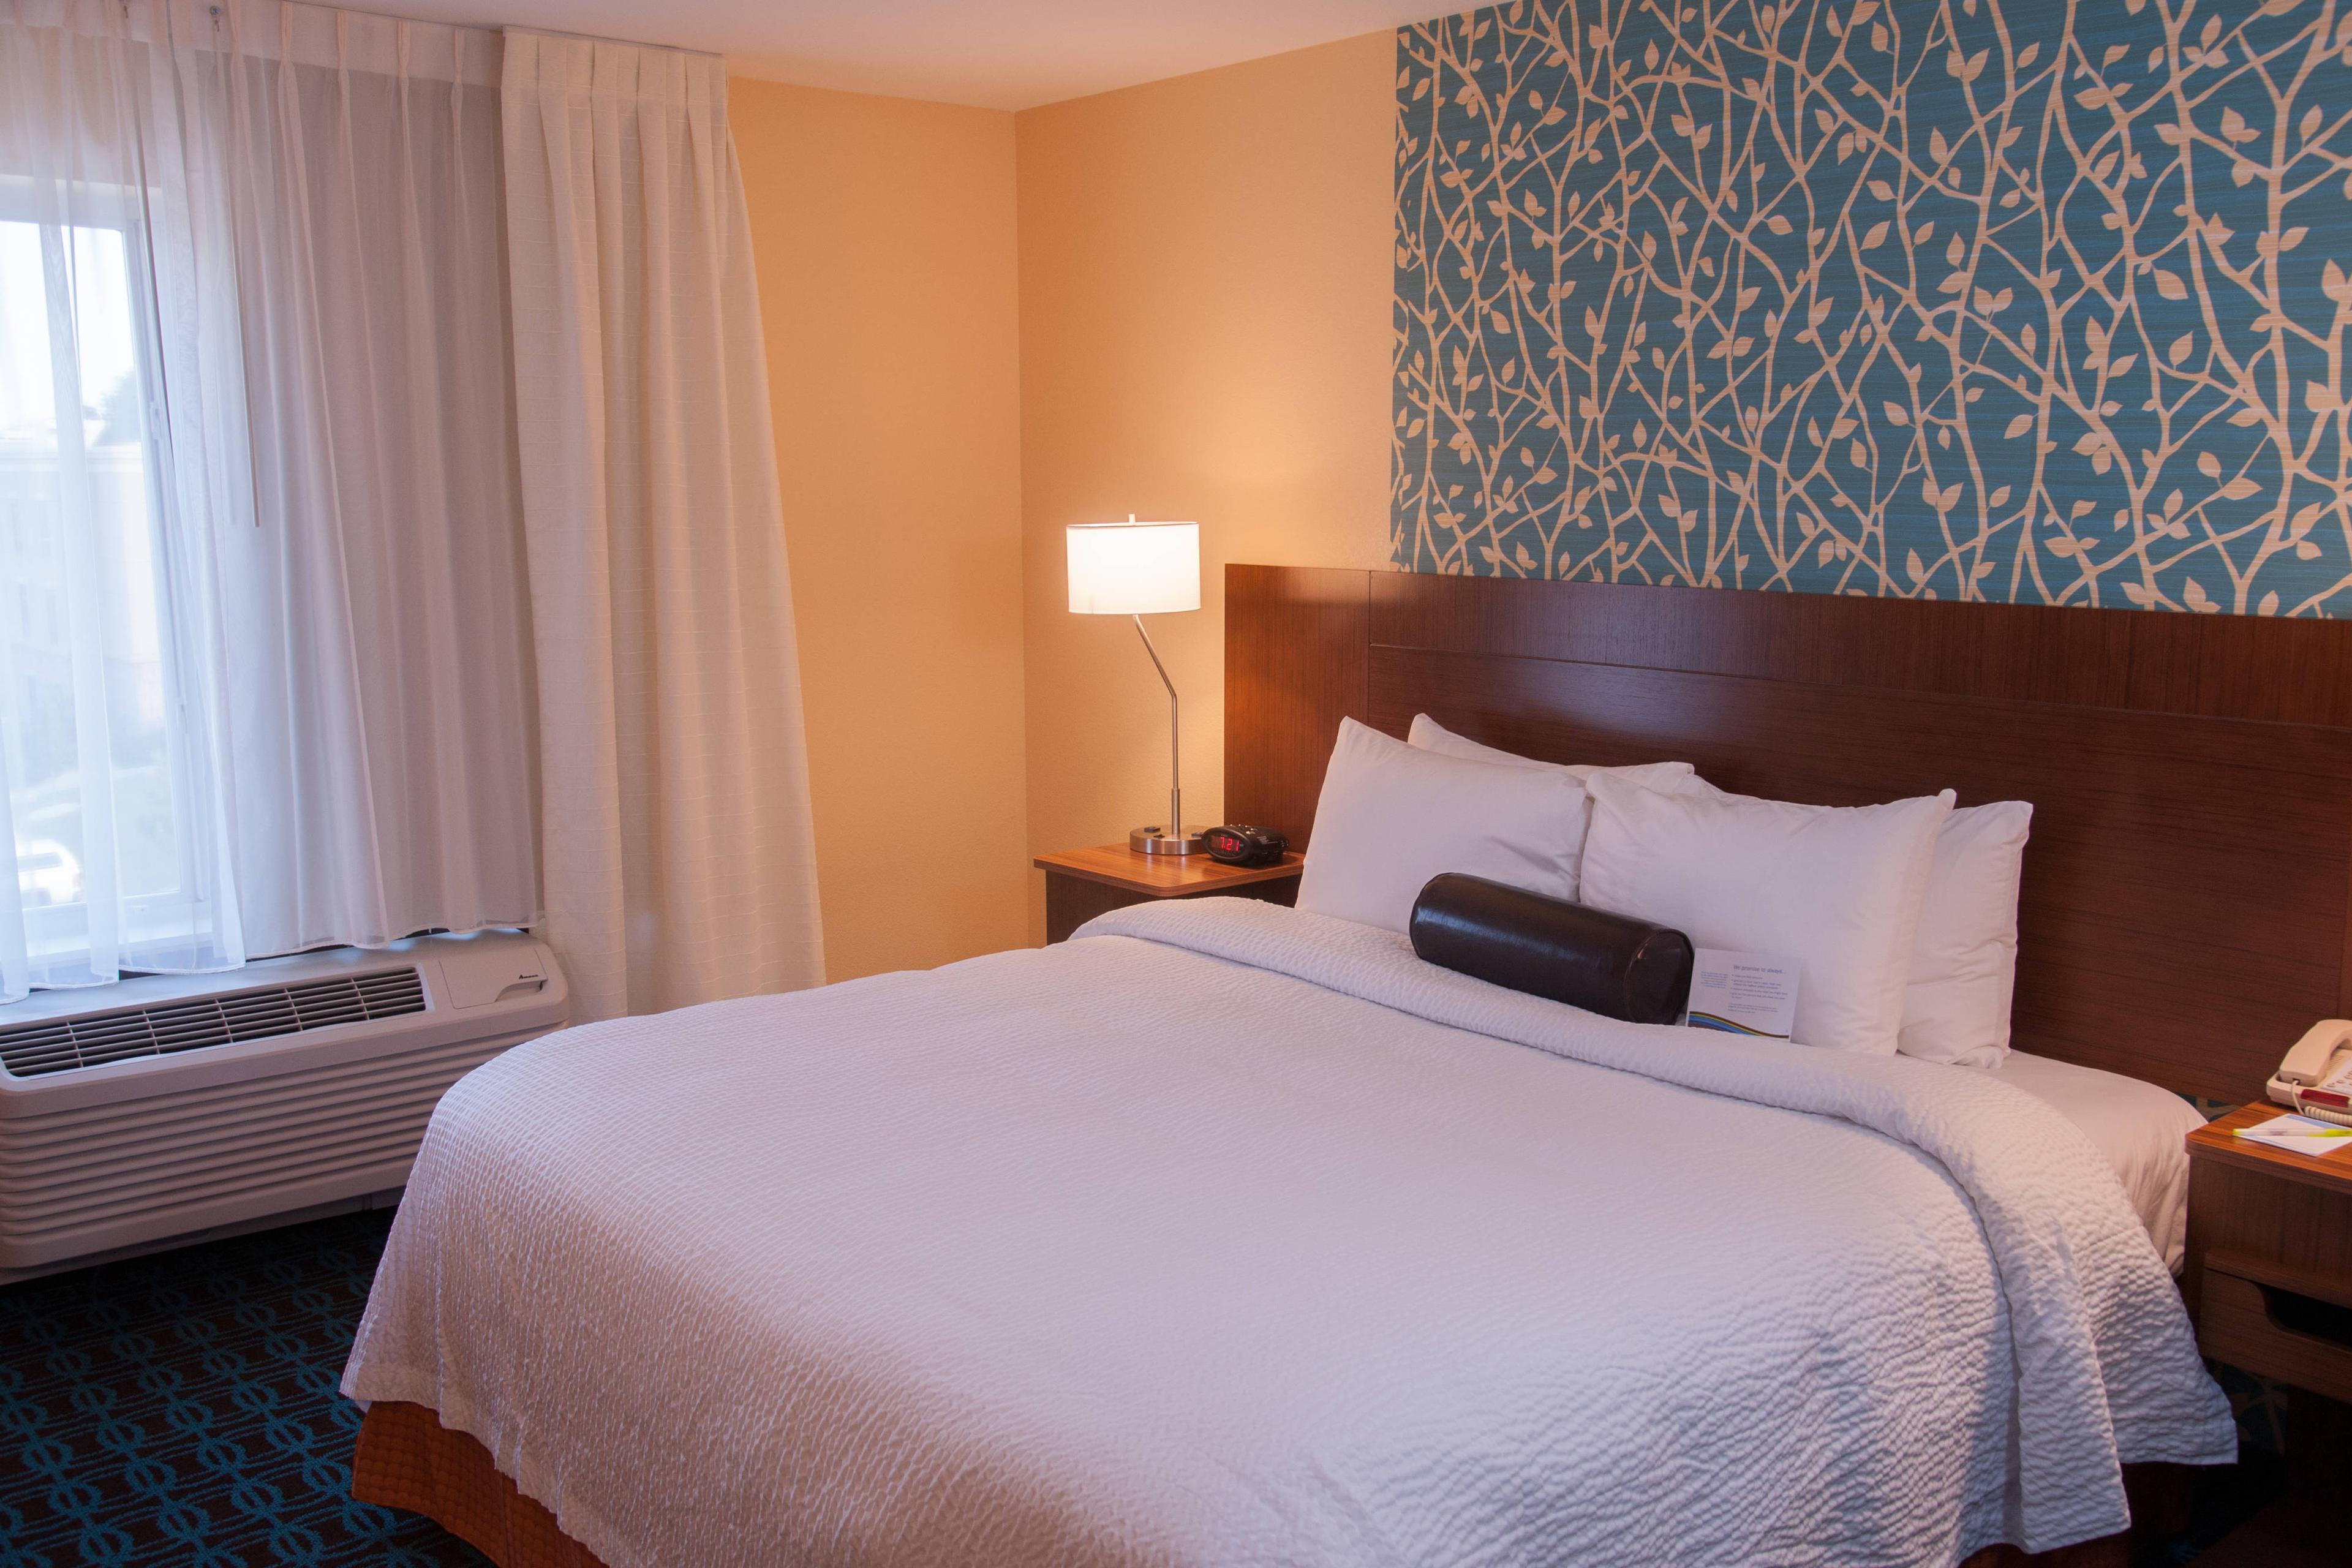 Our spacious guest rooms feature free high-speed Internet access.